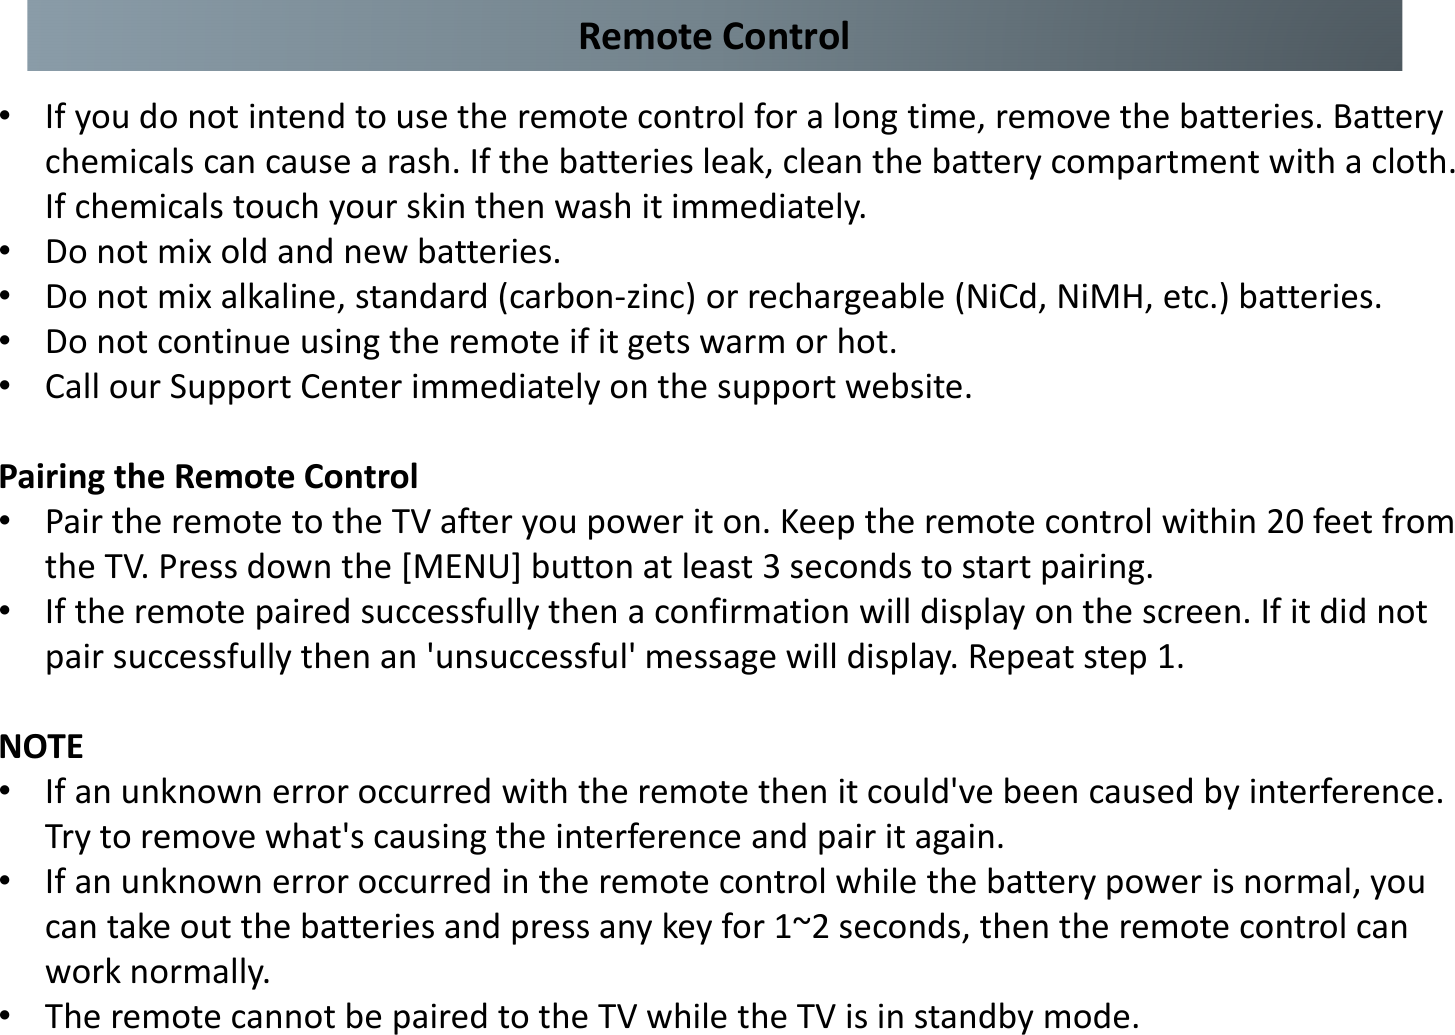 Remote Control•If you do not intend to use the remote control for a long time, remove the batteries. Battery chemicals can cause a rash. If the batteries leak, clean the battery compartment with a cloth. If chemicals touch your skin then wash it immediately. •Do not mix old and new batteries. •Do not mix alkaline, standard (carbon-zinc) or rechargeable (NiCd, NiMH, etc.) batteries. •Do not continue using the remote if it gets warm or hot. •Call our Support Center immediately on the support website.Pairing the Remote Control •Pair the remote to the TV after you power it on. Keep the remote control within 20 feet from the TV. Press down the [MENU] button at least 3 seconds to start pairing. •If the remote paired successfully then a confirmation will display on the screen. If it did not pair successfully then an &apos;unsuccessful&apos; message will display. Repeat step 1. NOTE •If an unknown error occurred with the remote then it could&apos;ve been caused by interference. Try to remove what&apos;s causing the interference and pair it again. •If an unknown error occurred in the remote control while the battery power is normal, you can take out the batteries and press any key for 1~2 seconds, then the remote control can work normally. •The remote cannot be paired to the TV while the TV is in standby mode.